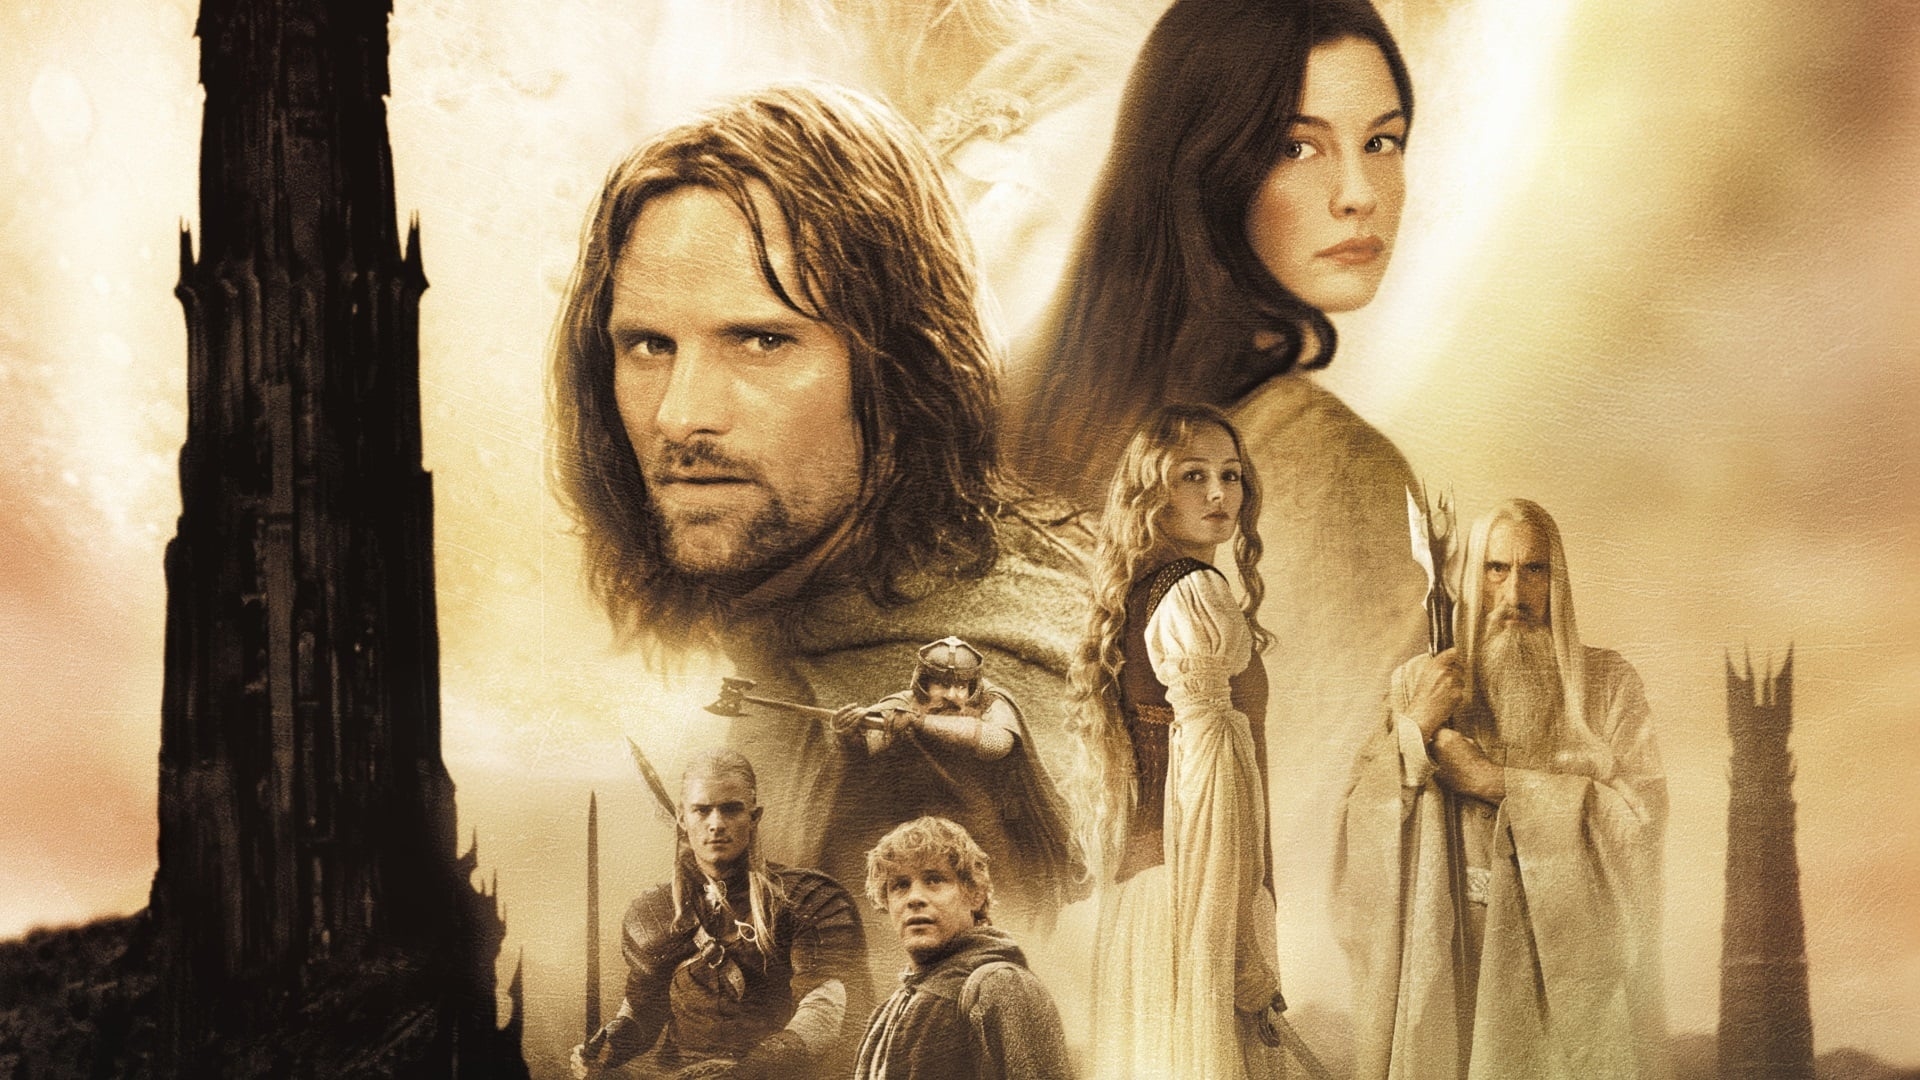 free downloads The Lord of the Rings: The Two Towers